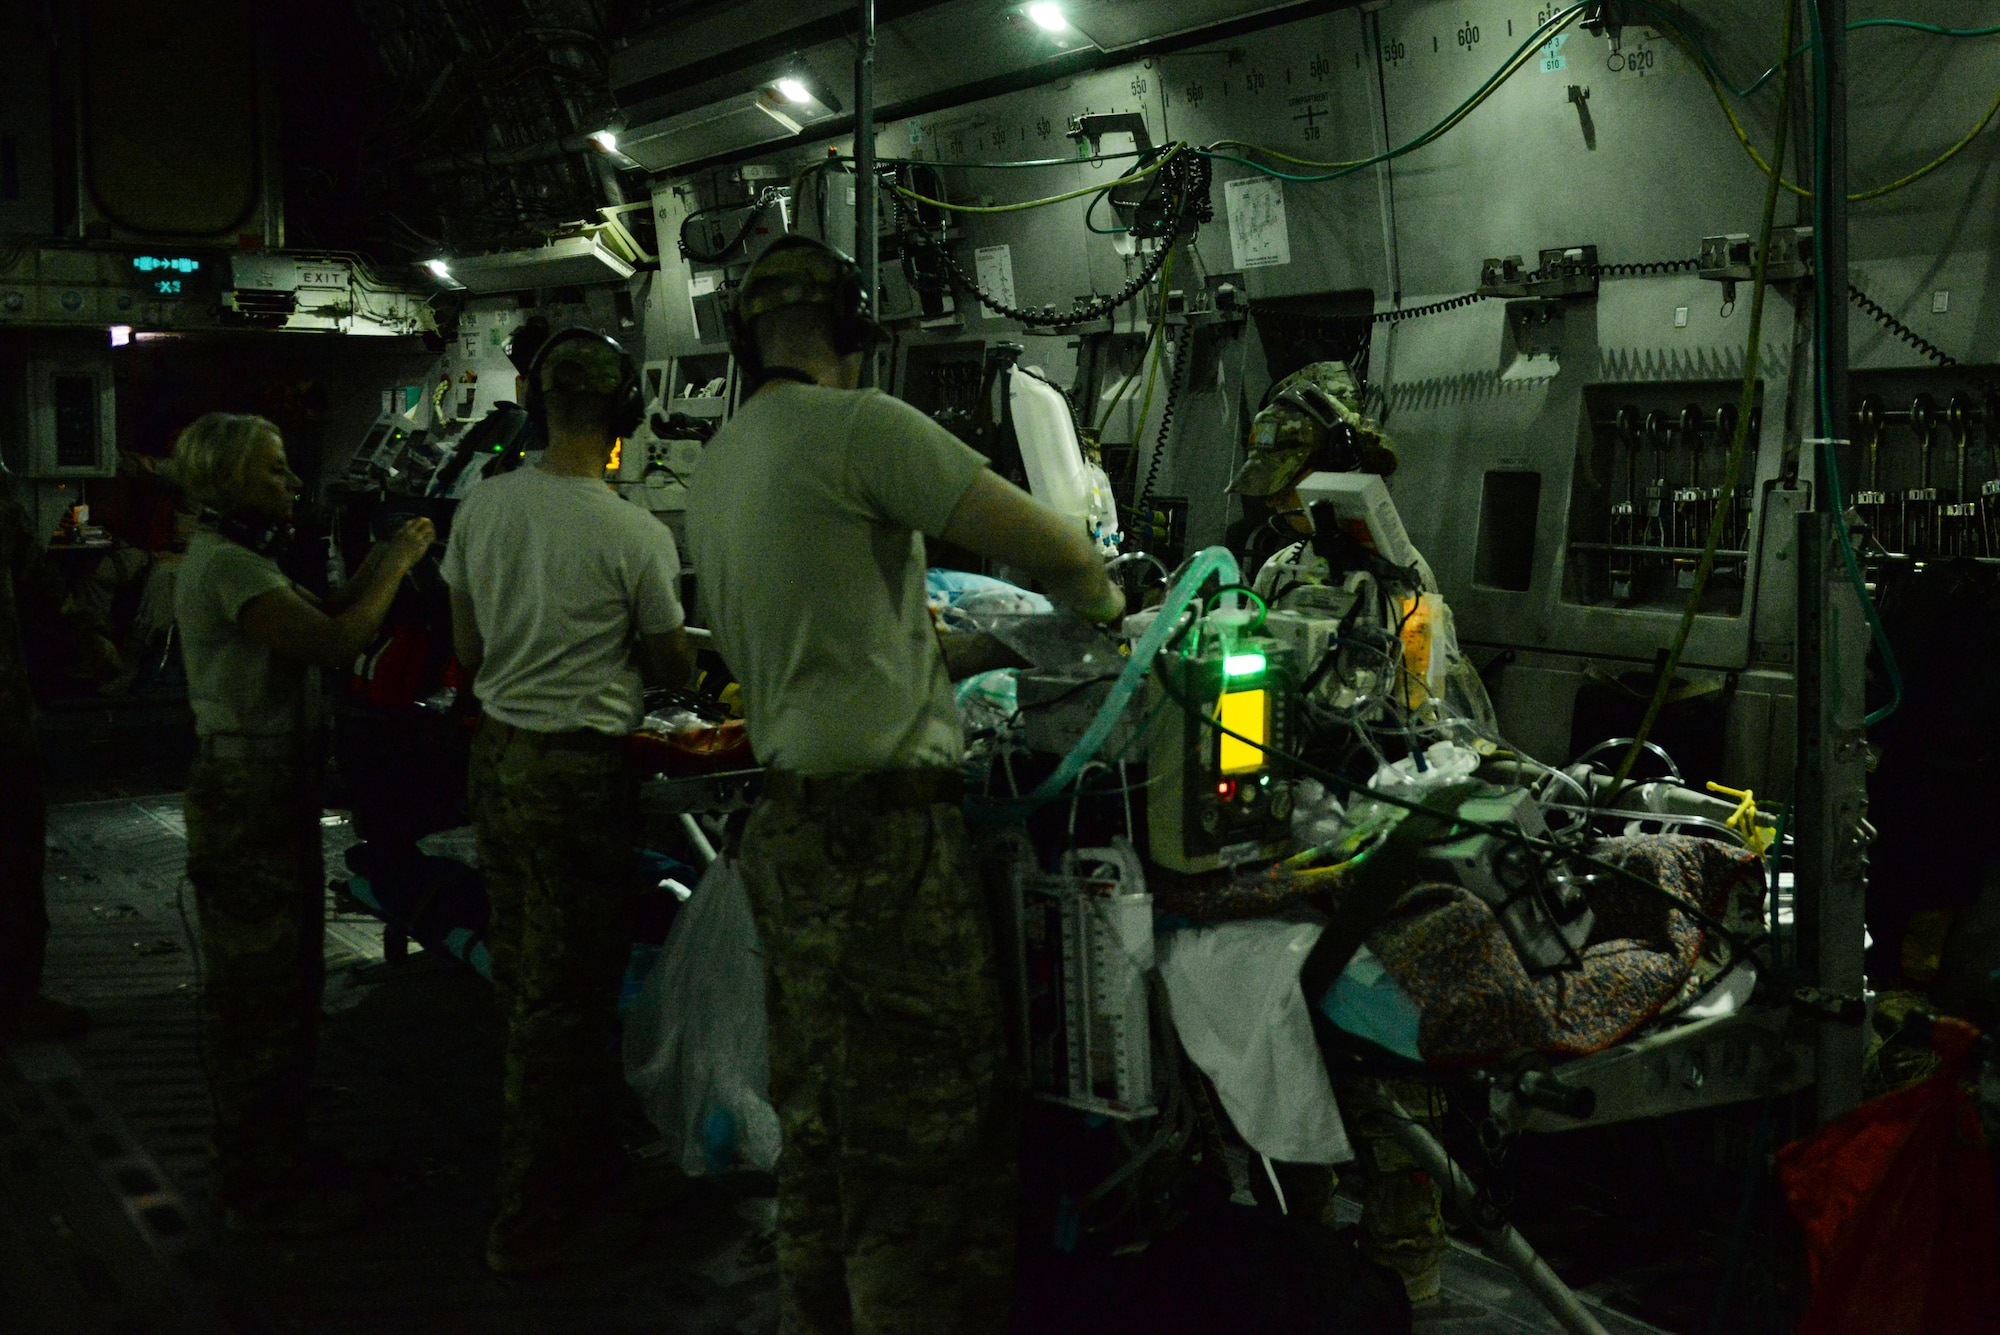 U.S. Air Force Airmen assigned to the 455th Expeditionary Aeromedical Evacuation Squadron provide in-flight medical care to injured service members on a C-17 Globemaster III that departed Bagram Airfield, Afghanistan, heading for medical care in Germany, Aug. 9, 2015. (U.S. Air Force photo by Maj. Tony Wickman)